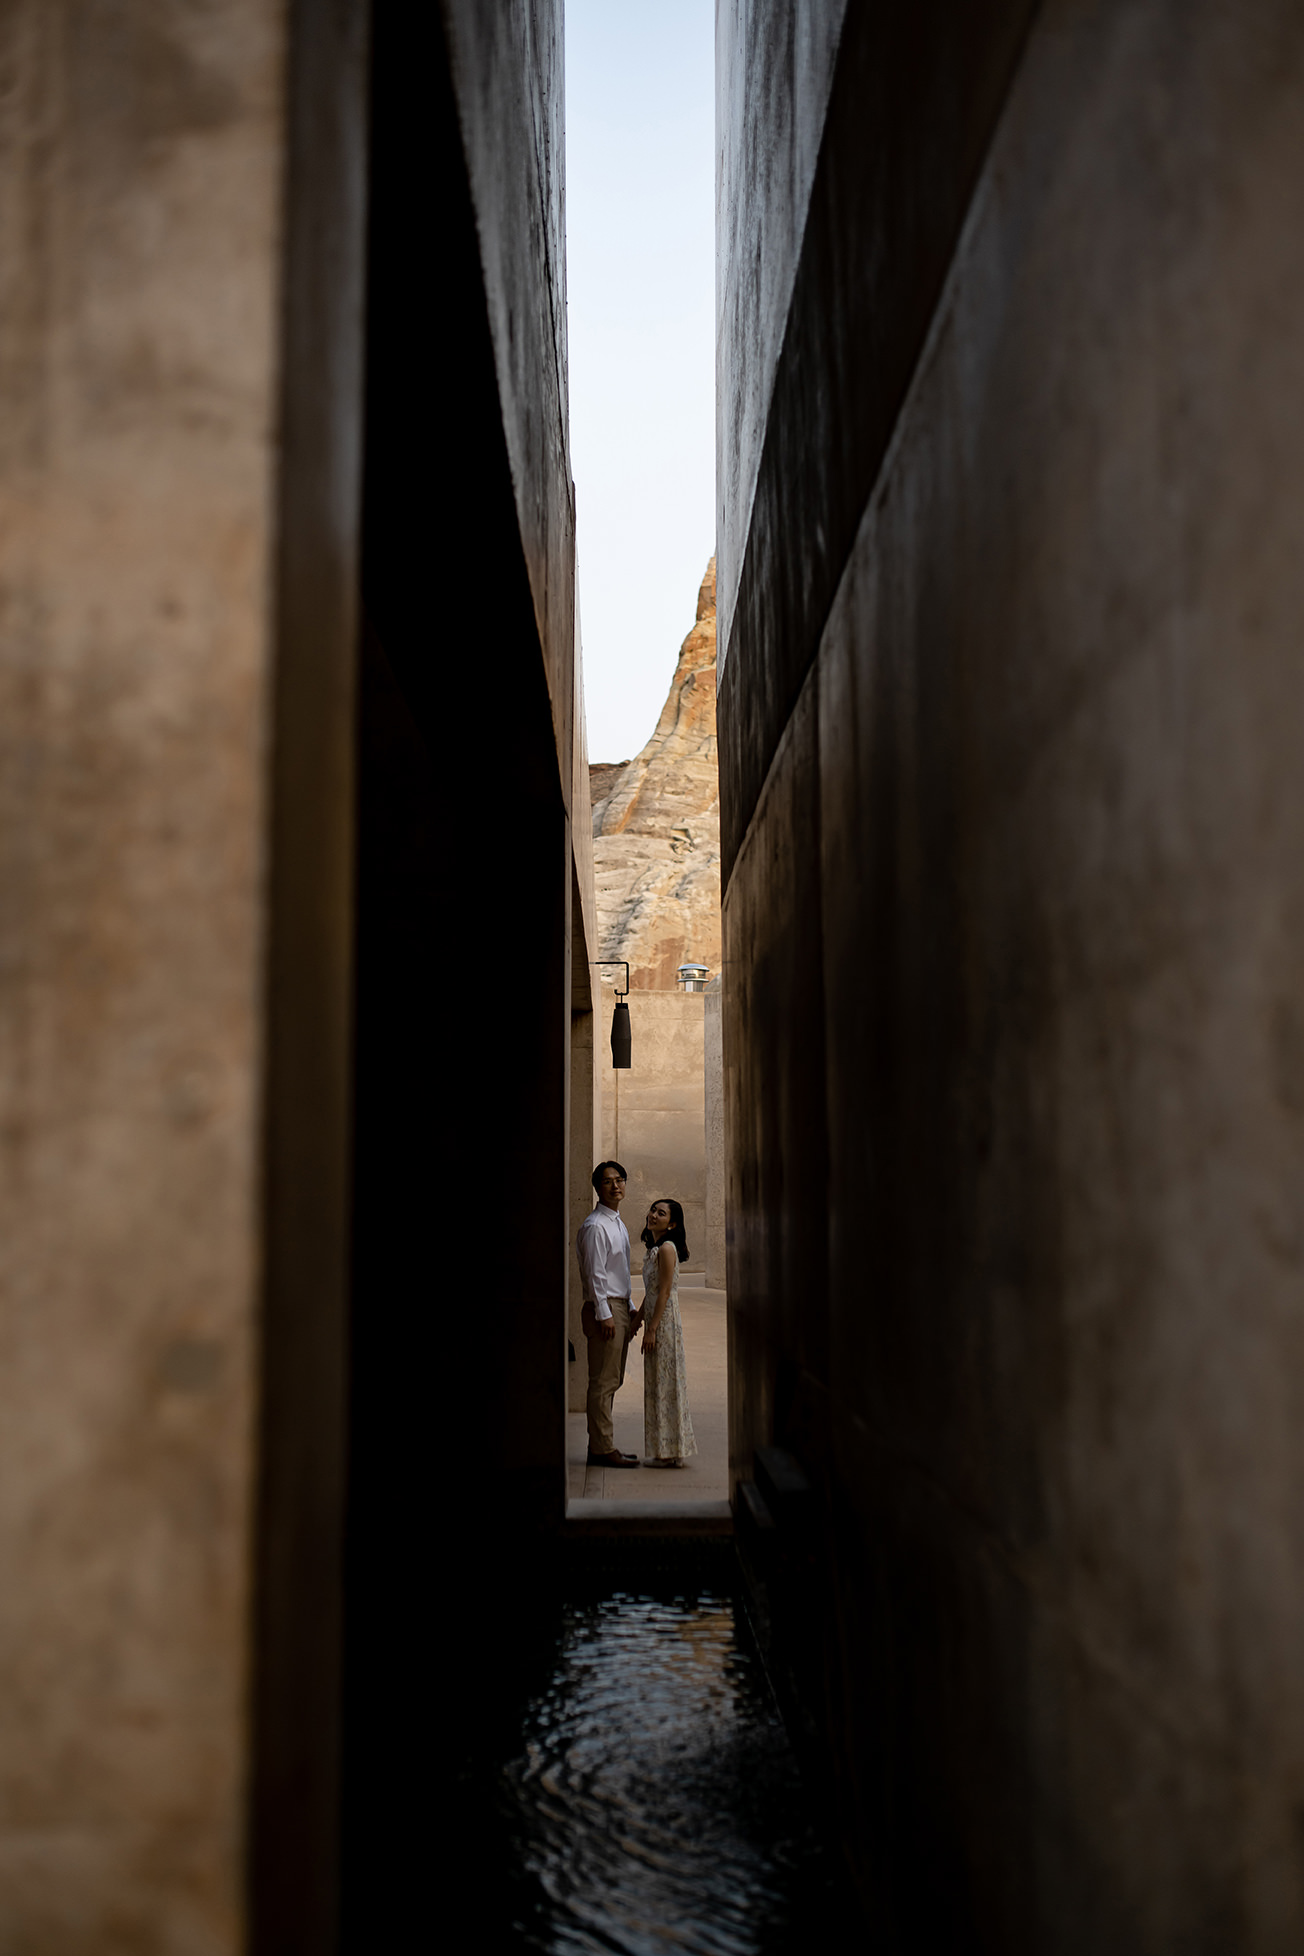 Bride and groom take a moment to themselves down an alley way.